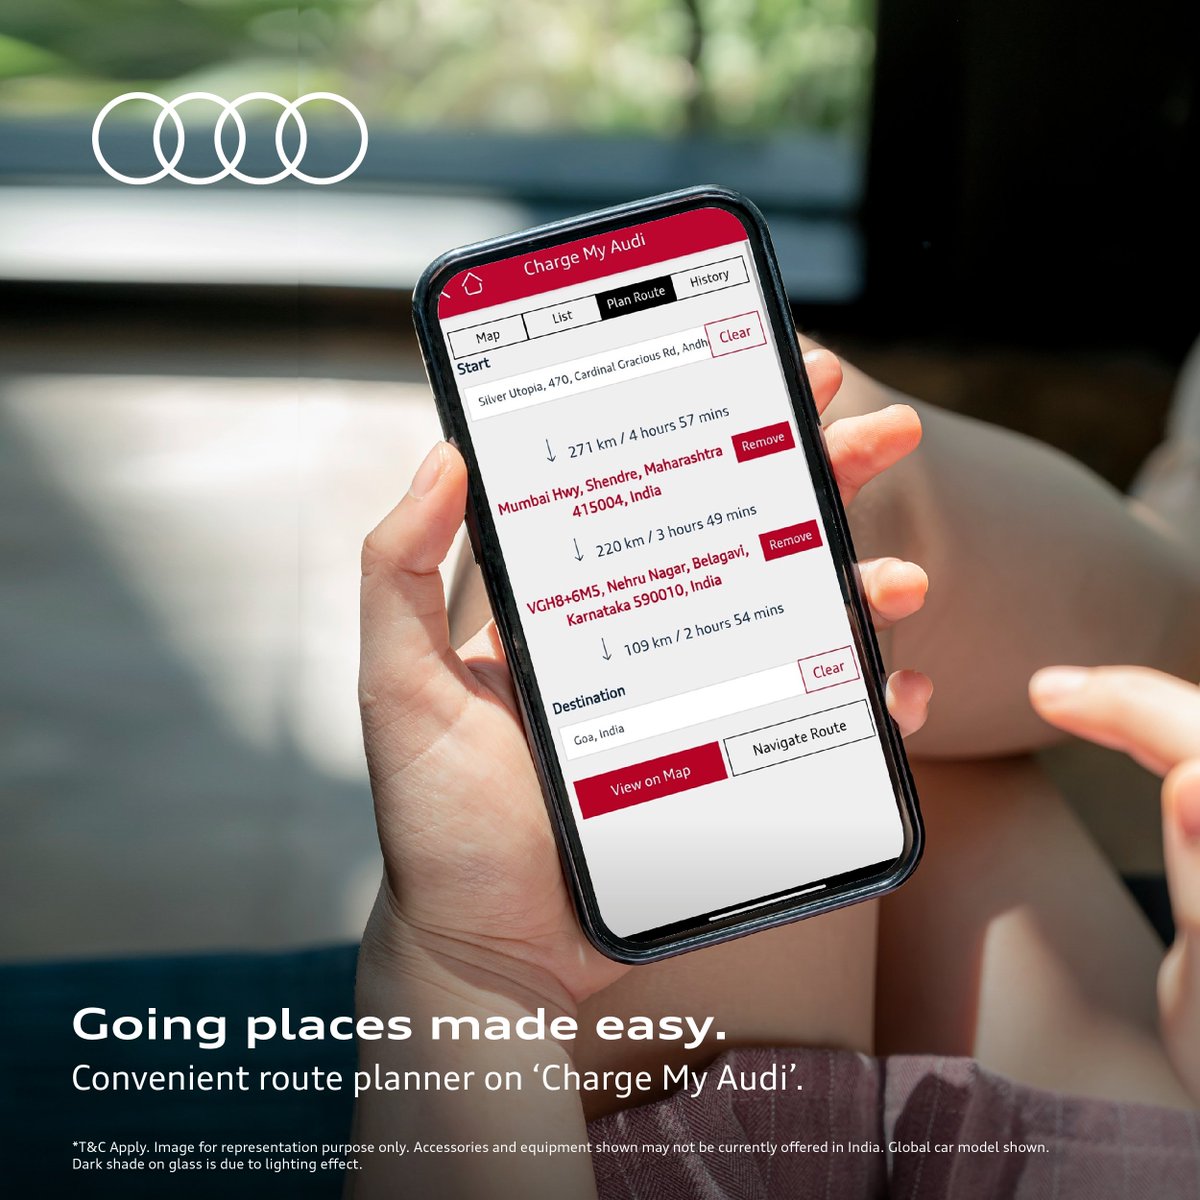 Embark on effortlessly electric journeys with the convenience of a route planner with Charge My Audi on the myAudi Connect App.

#AudiIndia #ChargeMyAudi #MyAudiConnectApp #EffortlesslyElectric #FutureIsAnAttitude